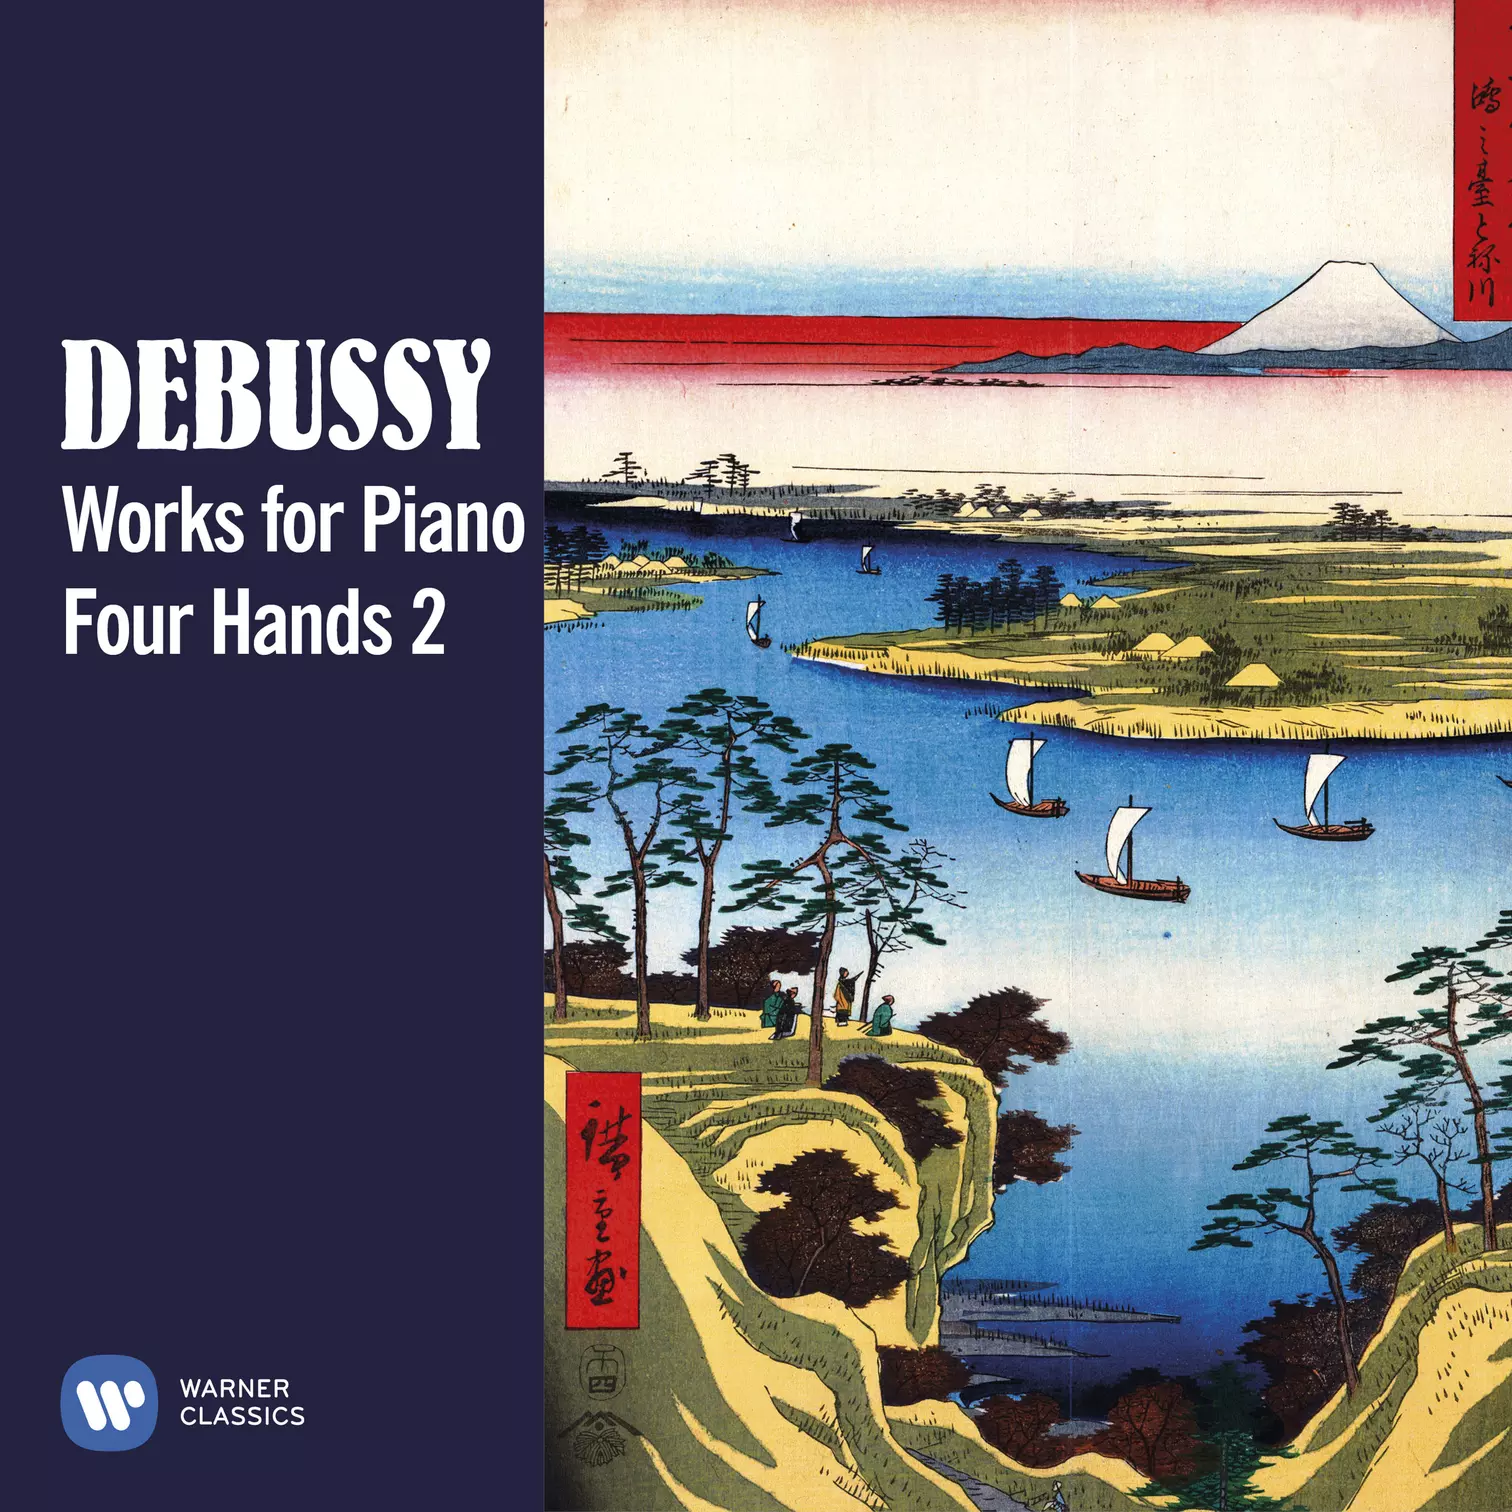 Debussy: Works for Piano Four Hands 2